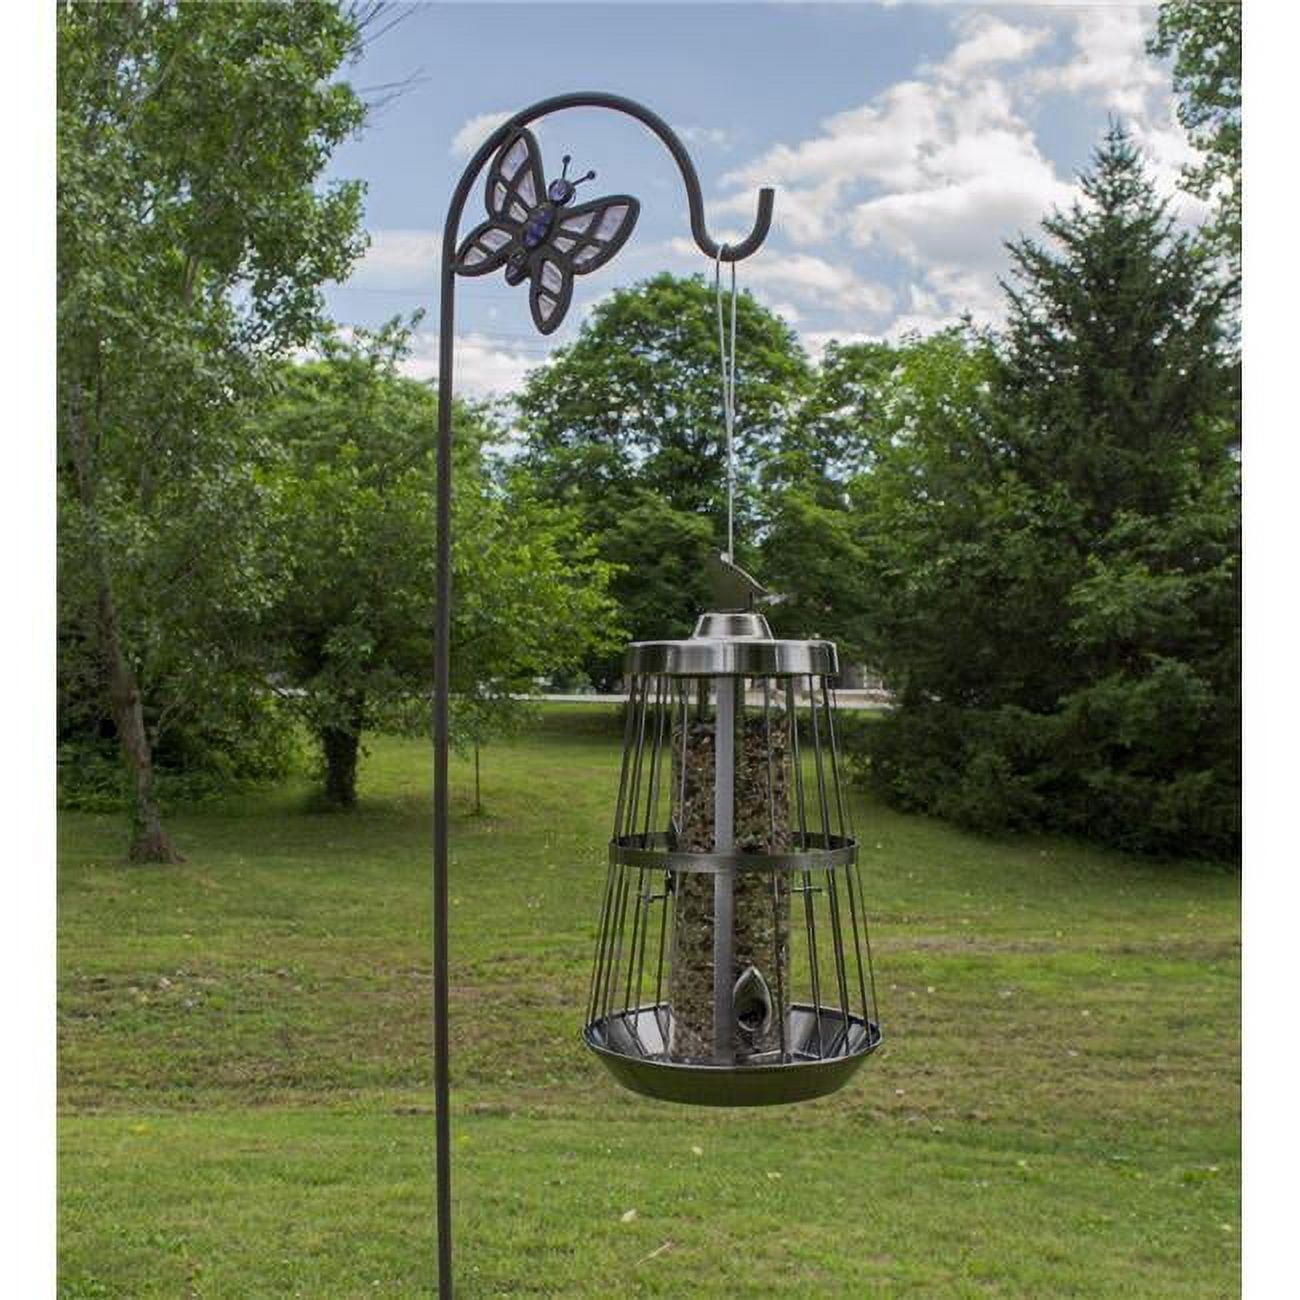 Picture of Outdoor Leisure Products BF1002 Deluxe Bird Feeder, Nickel